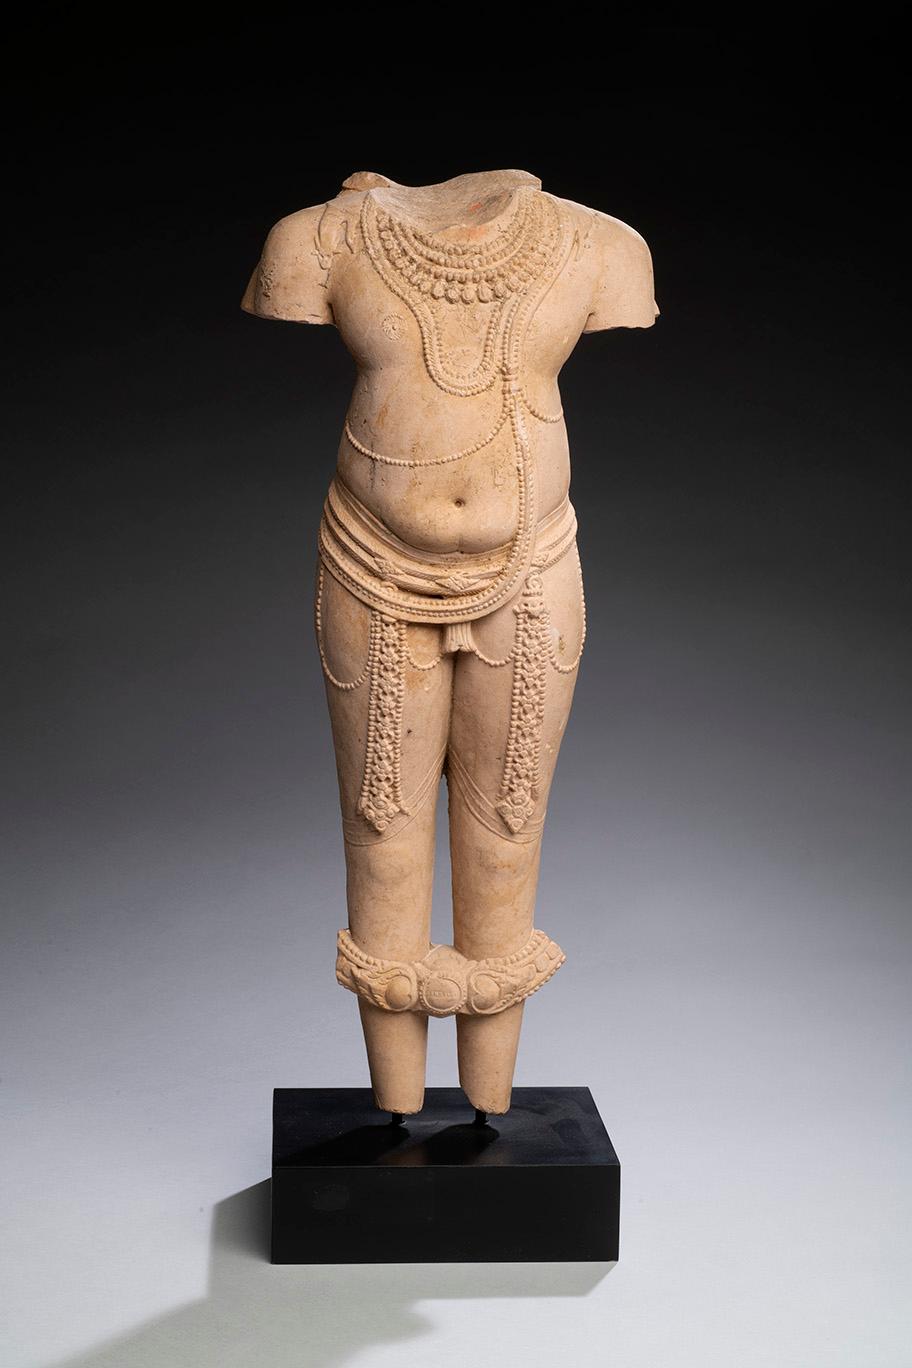 Unknown Figurative Sculpture - Indian Pink Sandstone Figure of a Deity, Central India, 11th/12th century